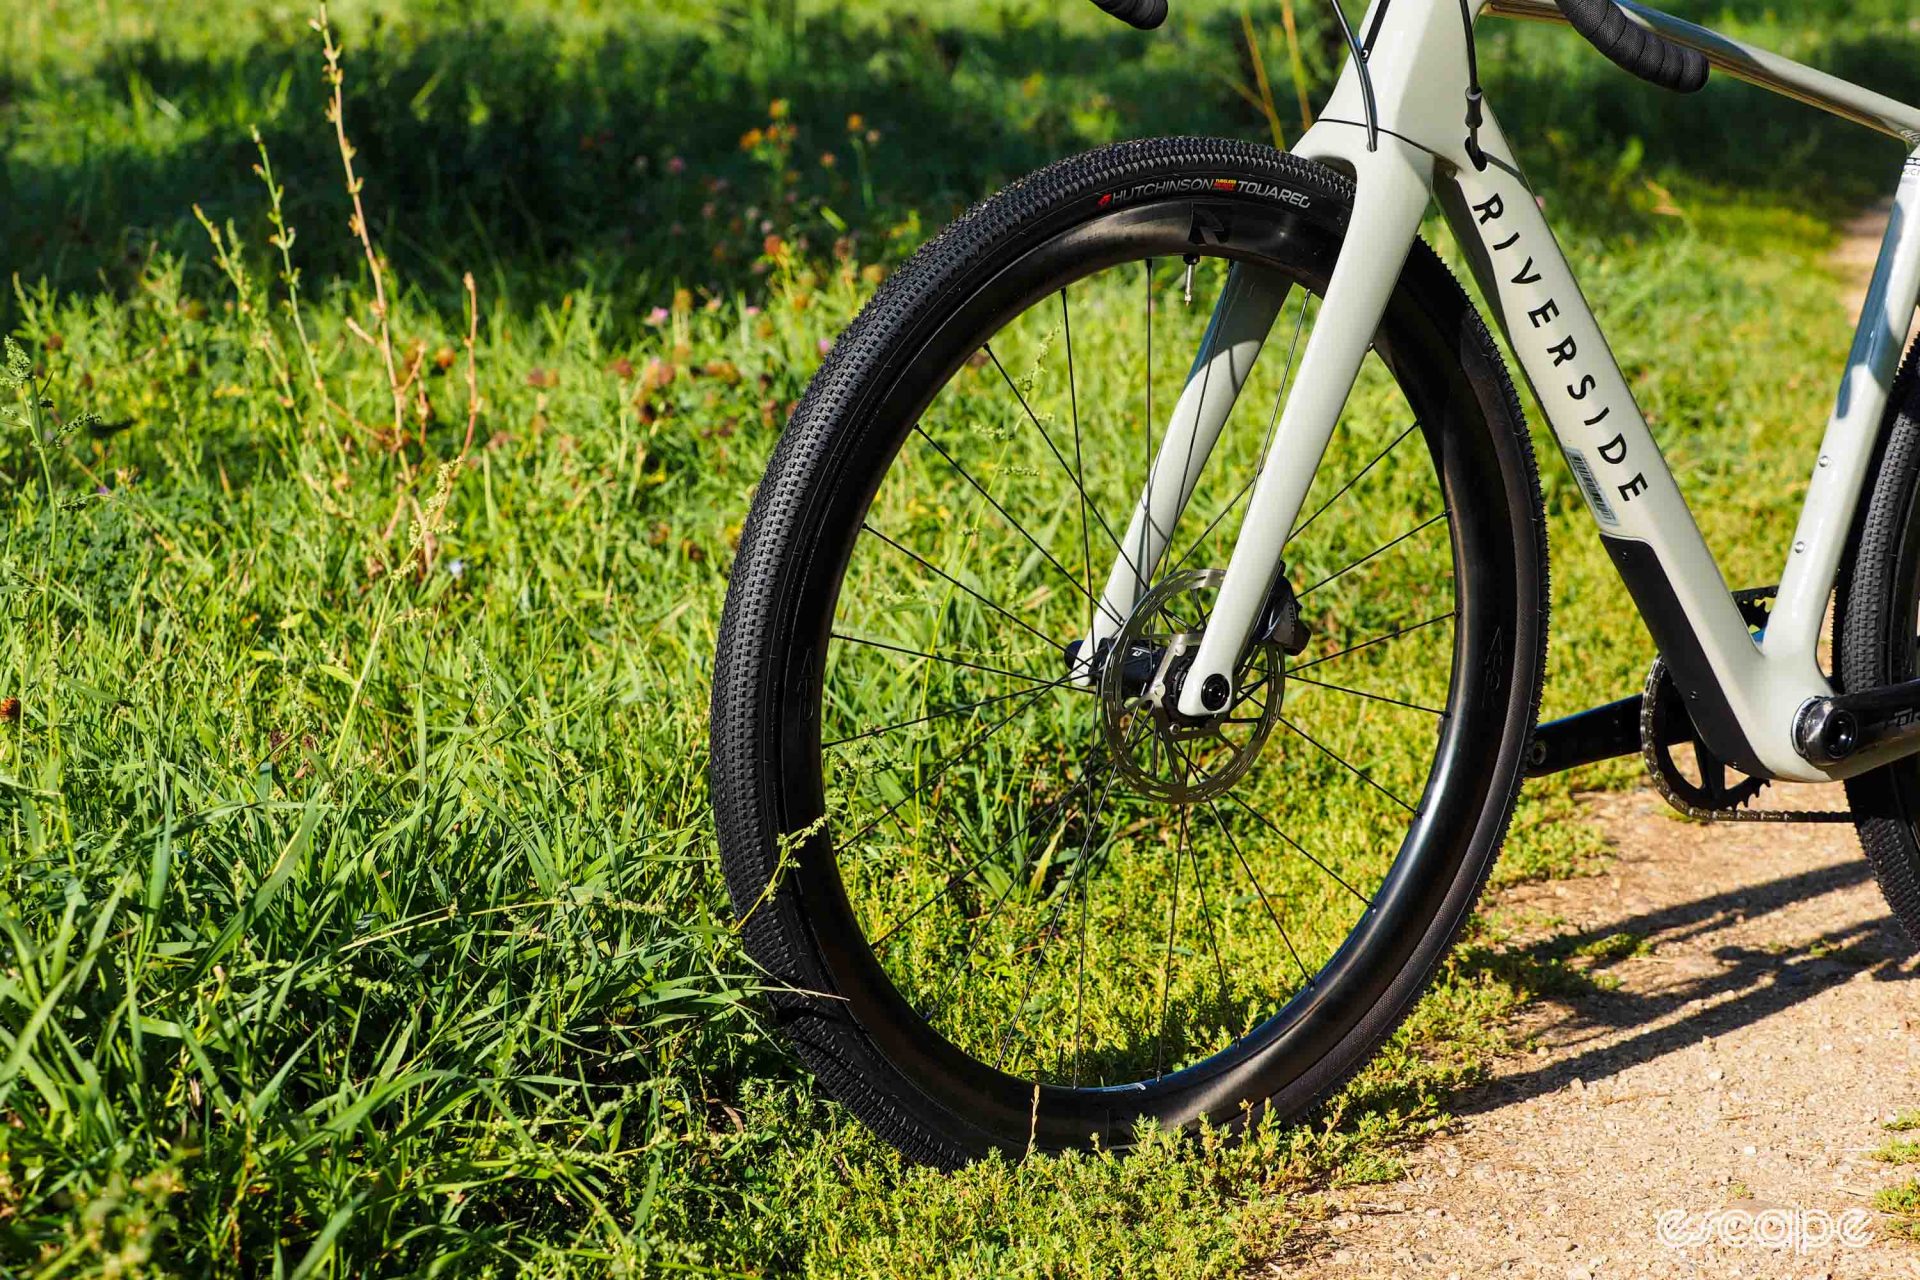 The fork and front Reynolds ATR carbon fiber wheel, which has a mid-depth 40mm section and is shod with Hutchinson Touareg tire.